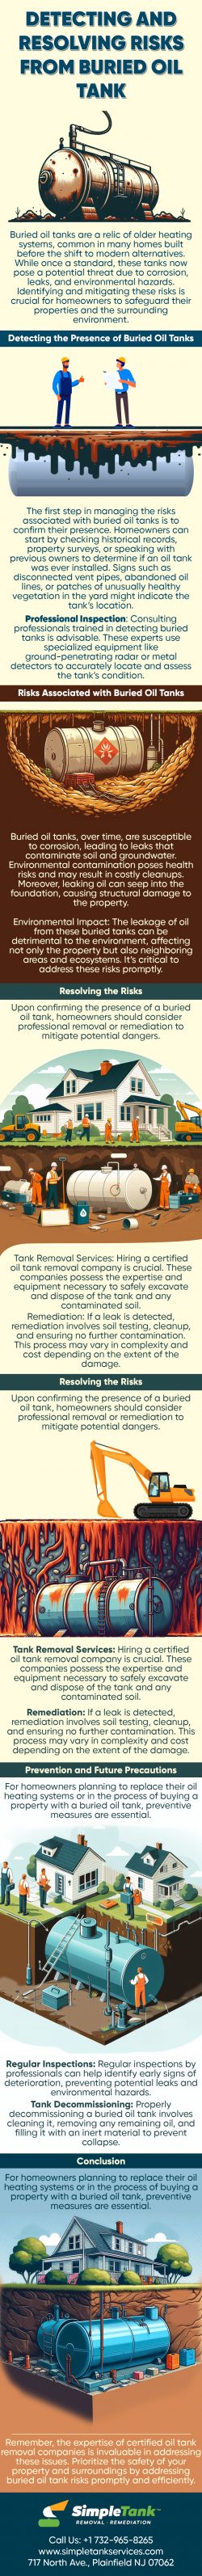 Safeguarding Your Home: Detecting and Resolving Risks from Buried Oil Tanks